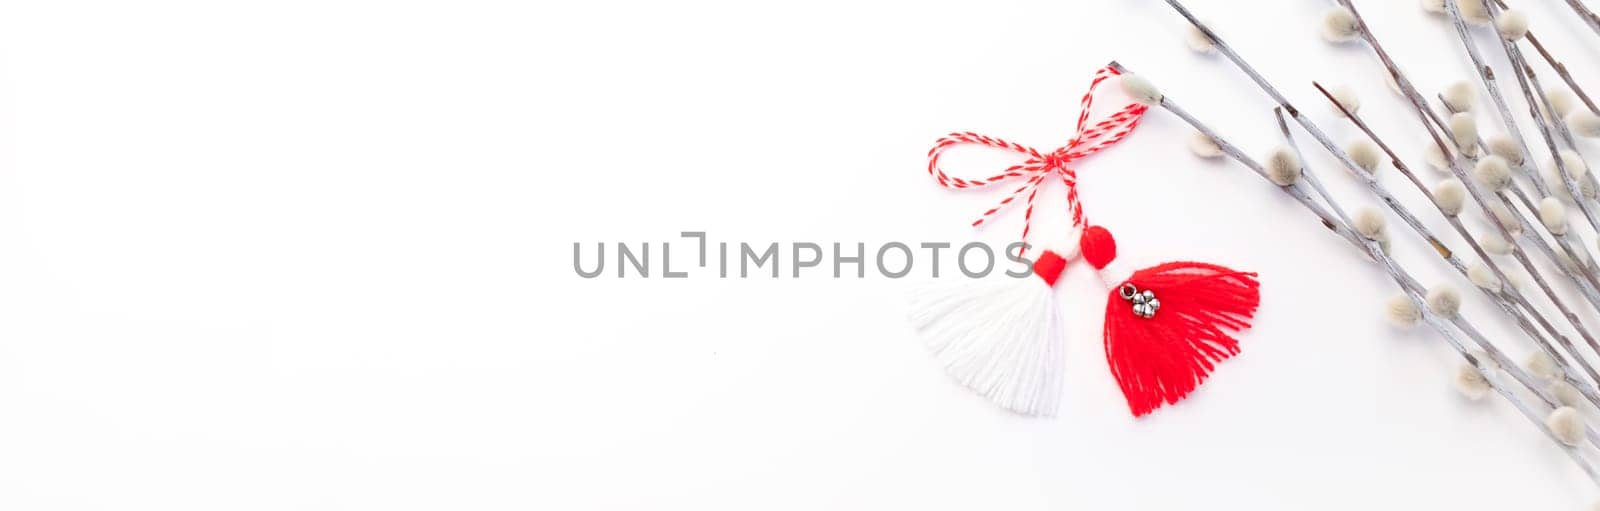 Banner Martenitsa, Baba Marta. Traditional Martisor Symbol of Holiday March 1 on White Background With Willow Twig. Grandma Marta Day Celebration In Romania,Bulgaria,Moldova. Red,white colored threads by netatsi